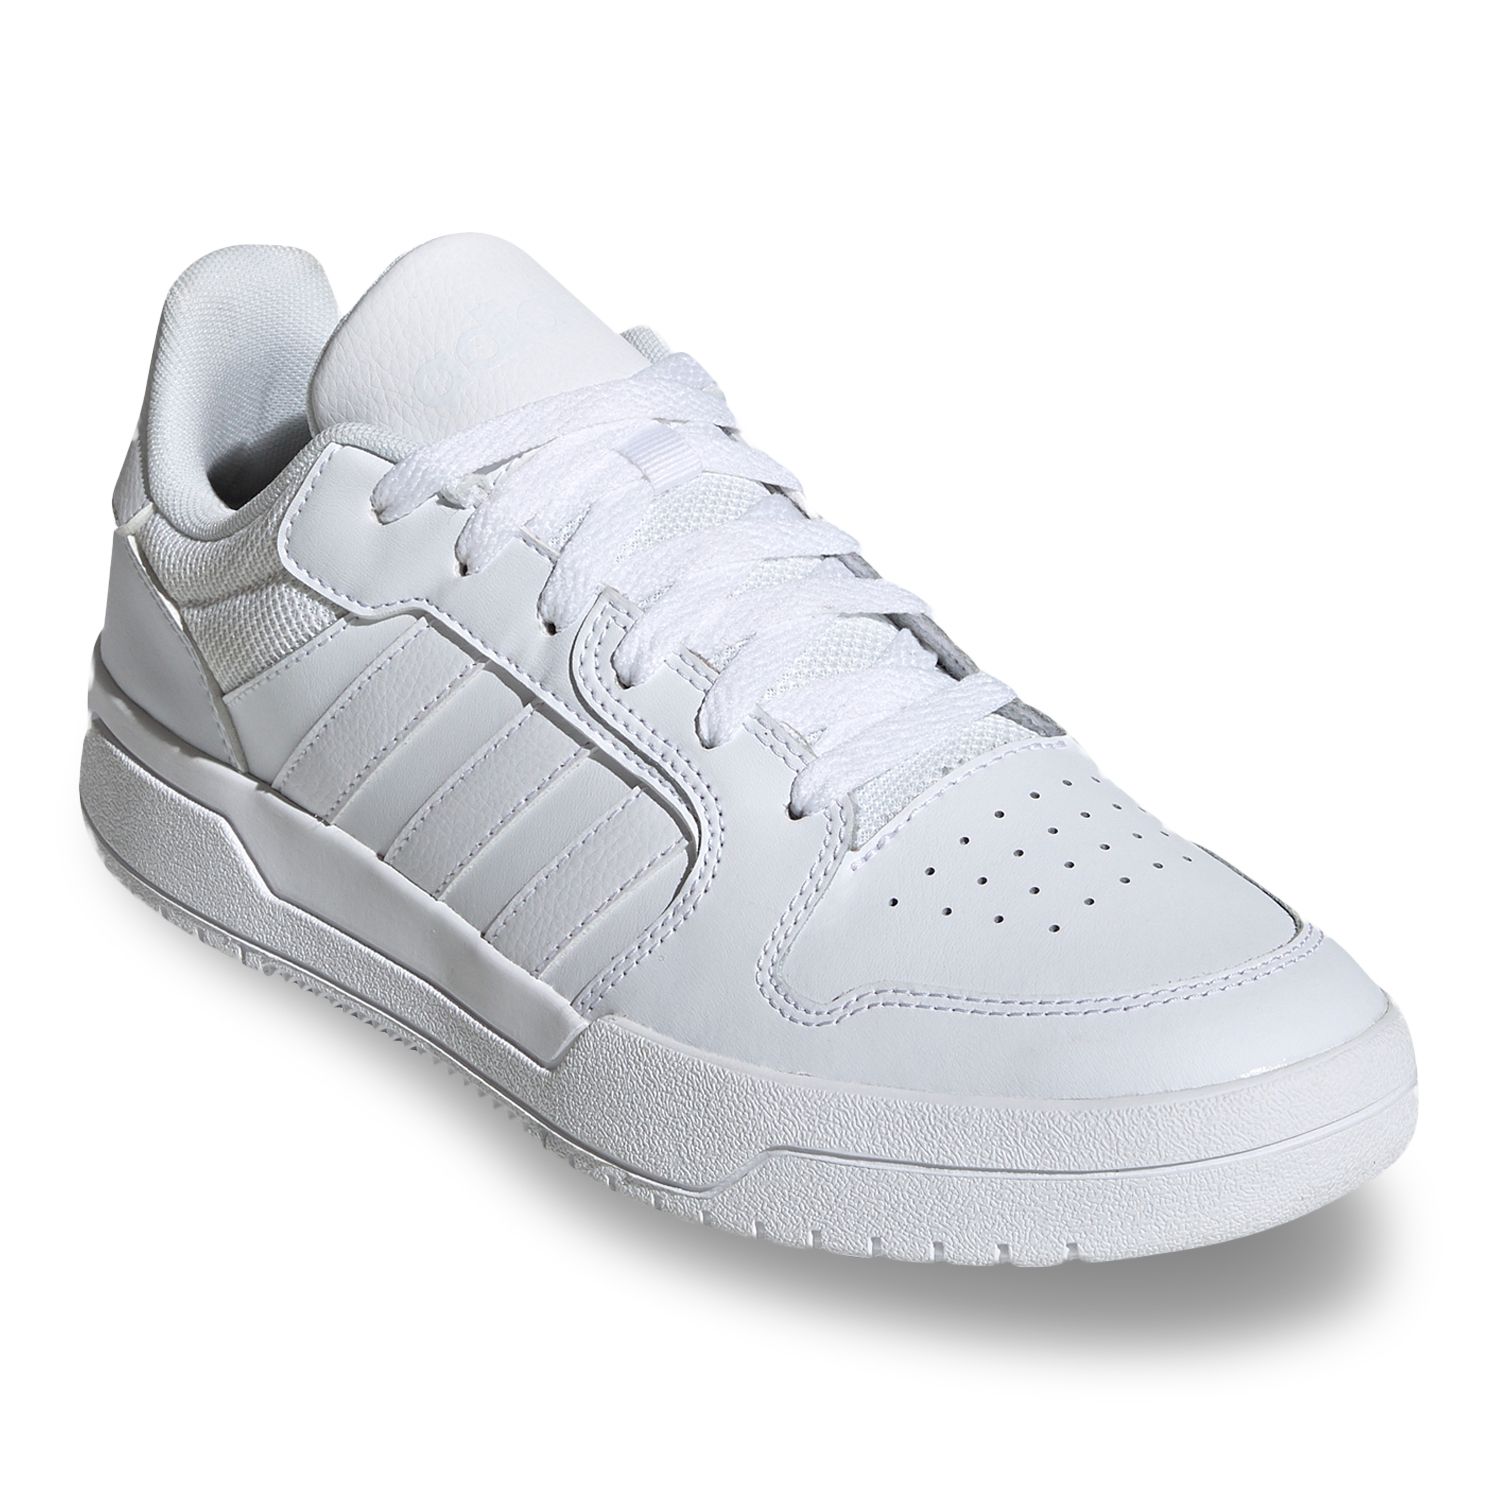 adidas all white mens sneakers